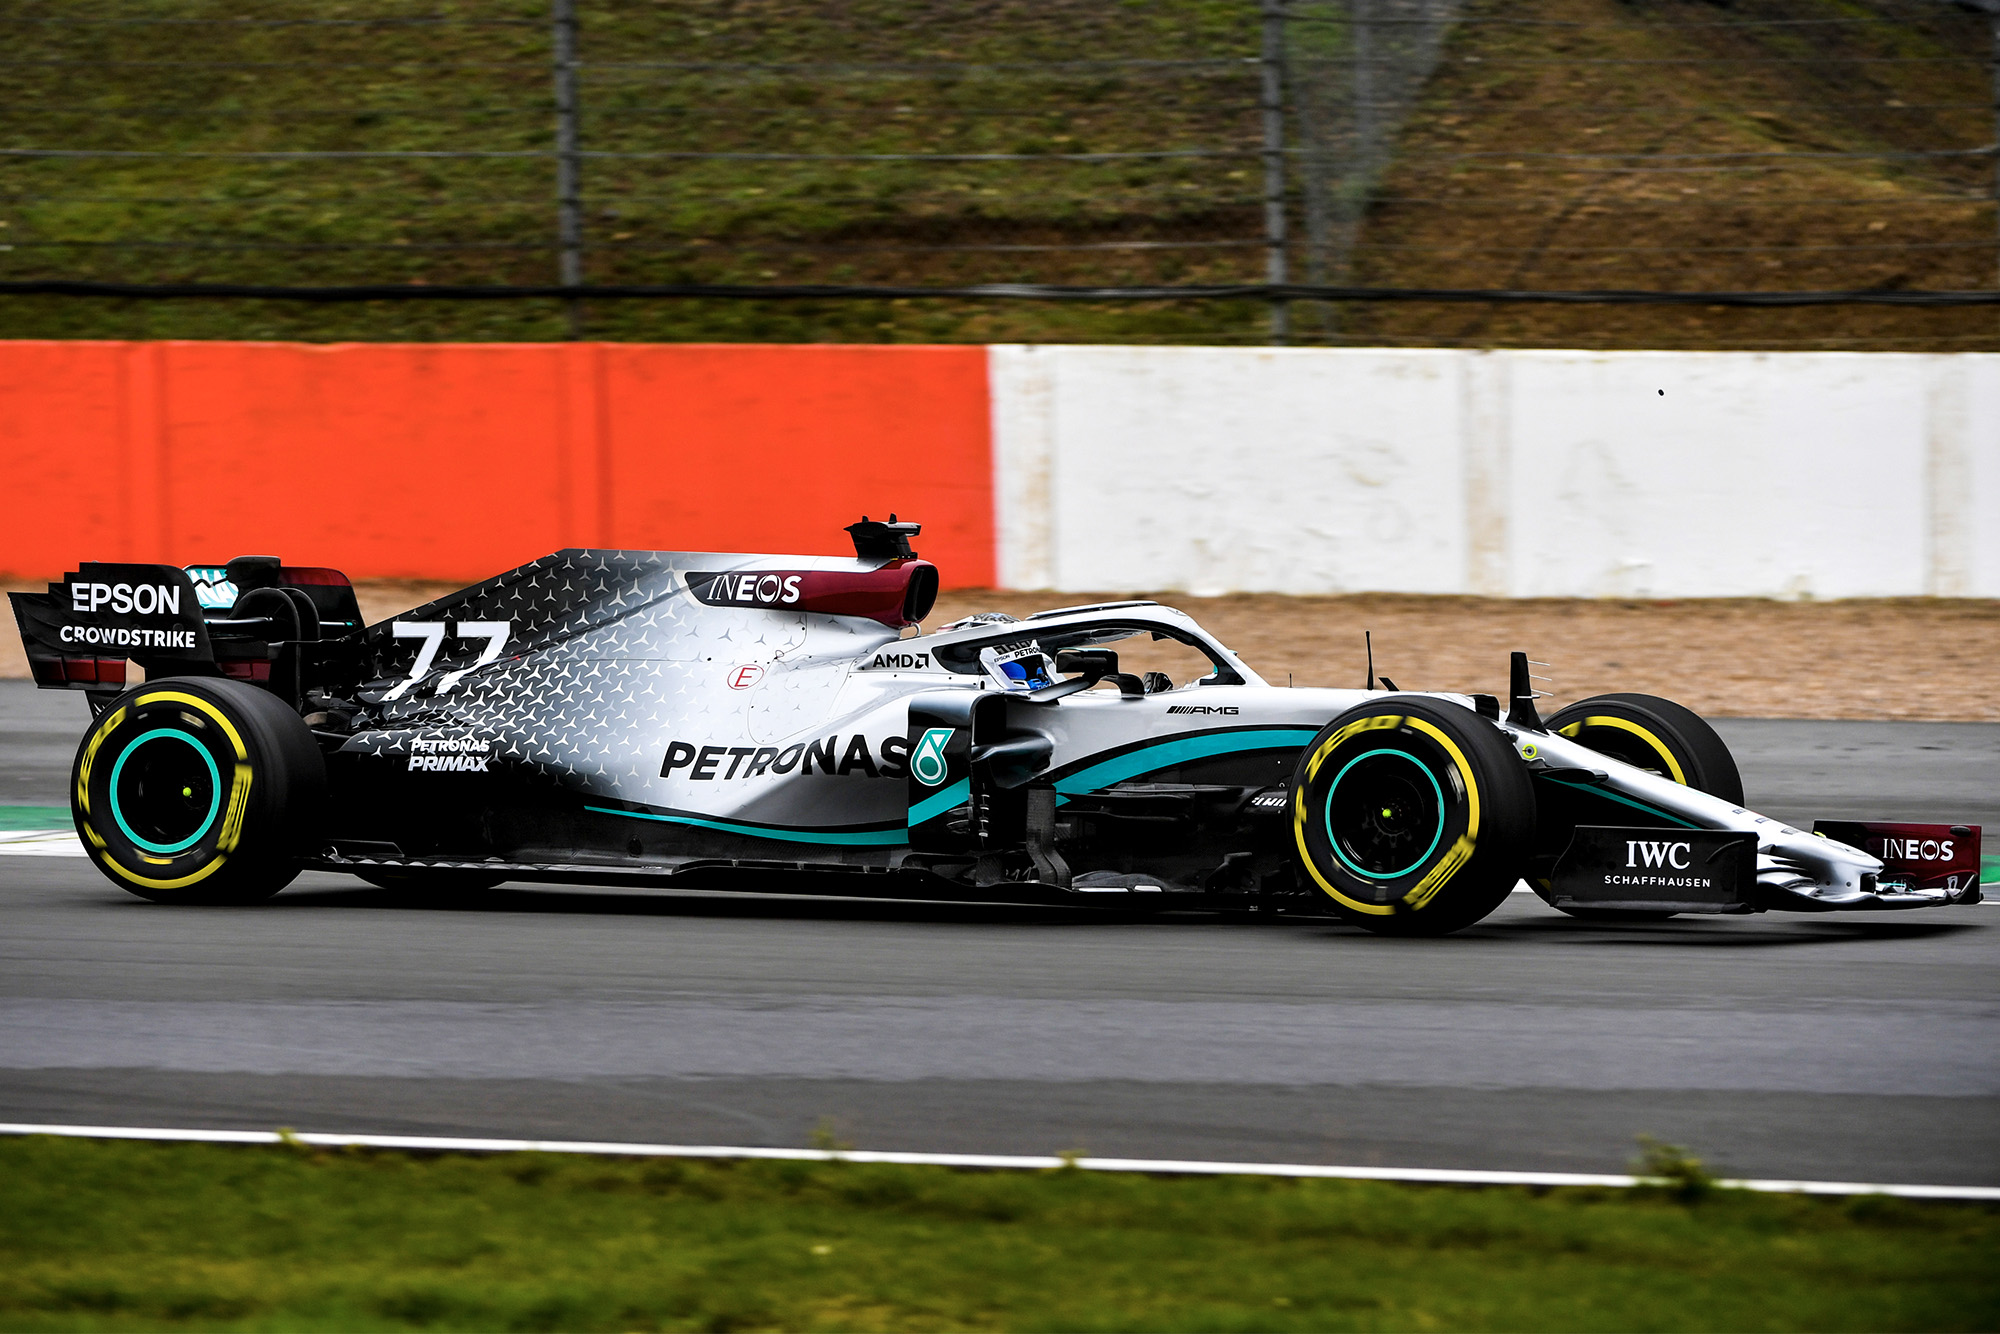 Mercedes W11 wallpapers